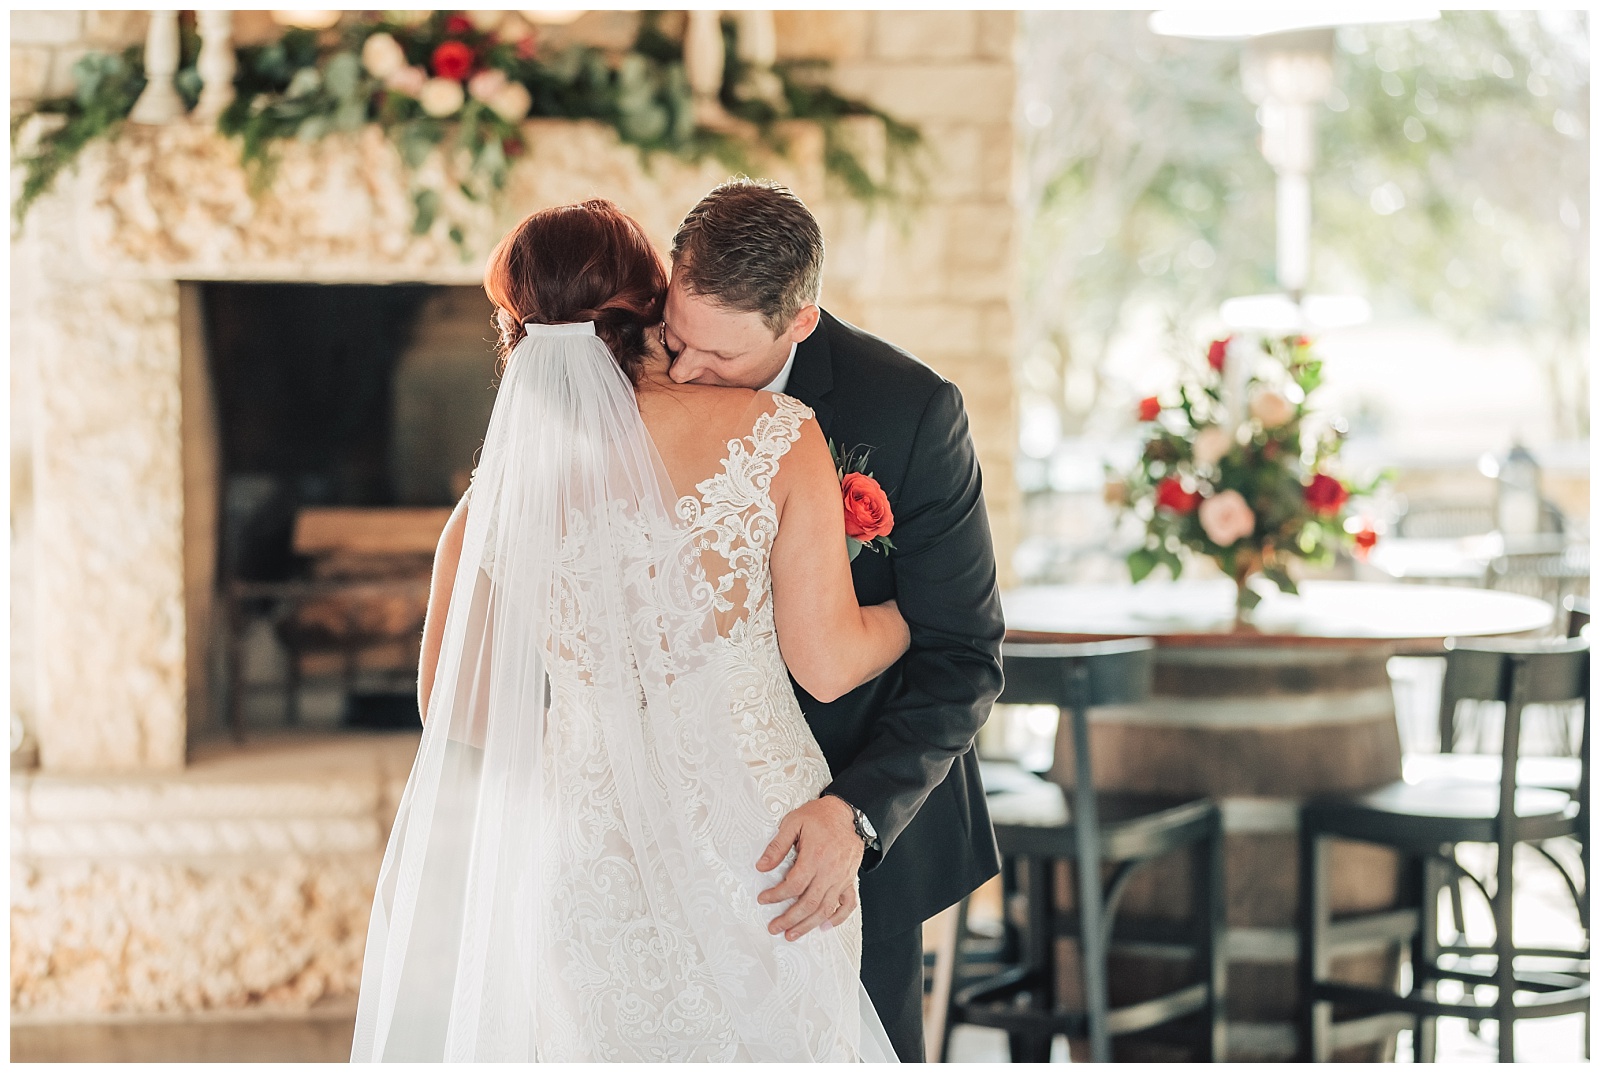 Quiet moment together pre ceremony | Glam Burgundy and Blush Wedding